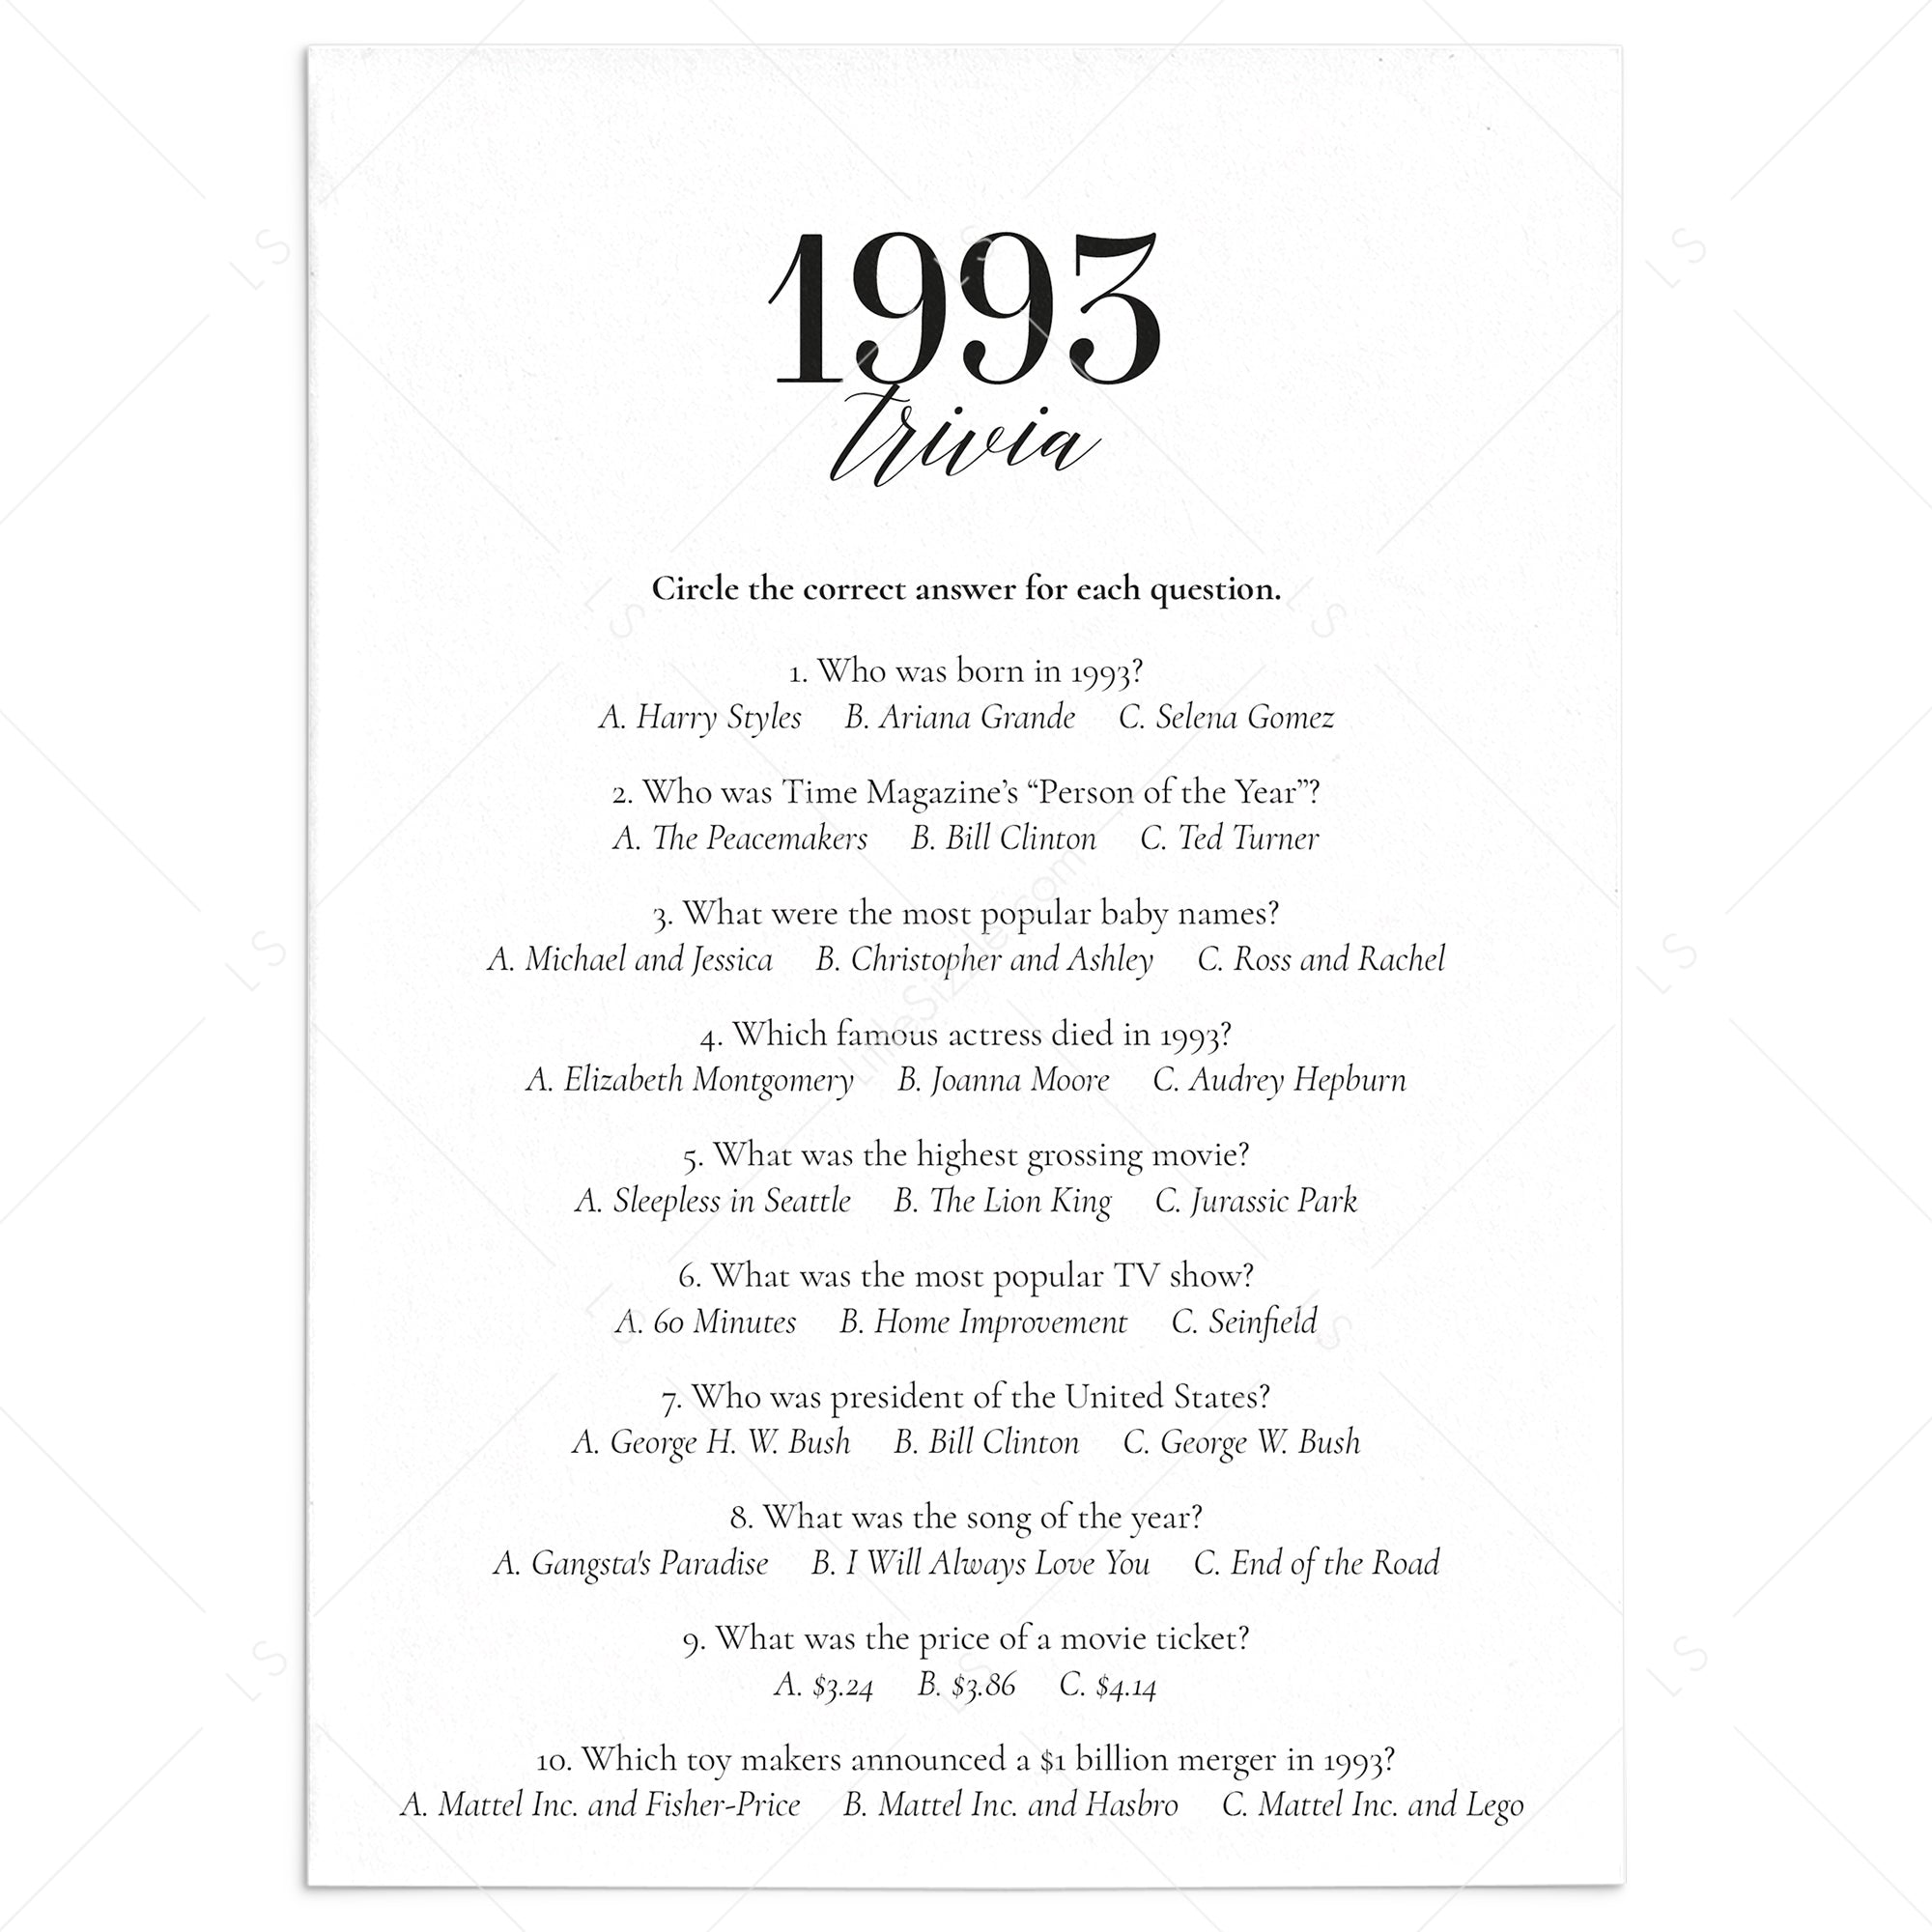 1993 Fun Facts Quiz with Answers Printable by LittleSizzle